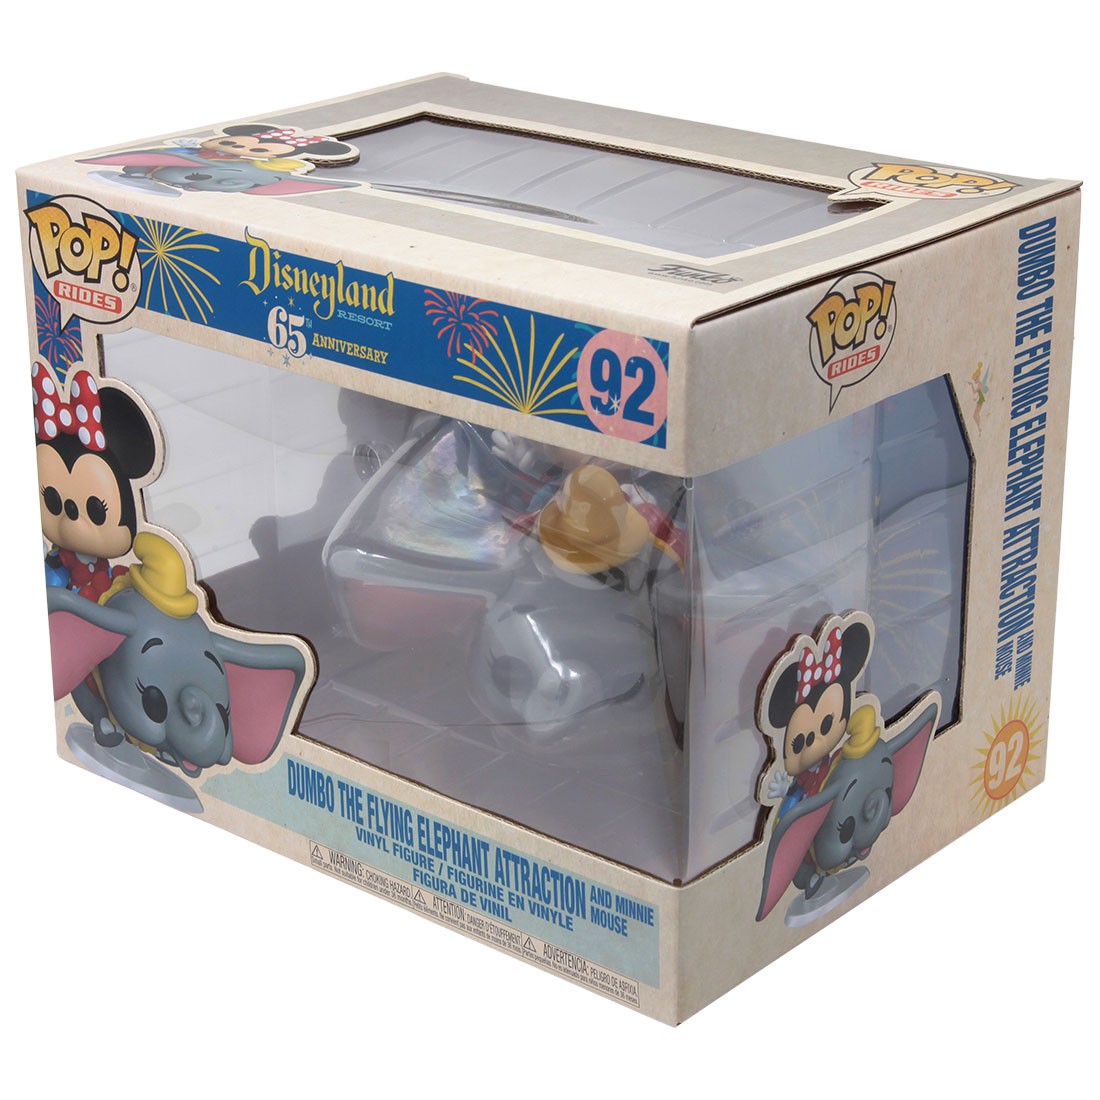 Funko POP Rides Disney 65th Anniversary Dumbo The Flying Elephant  Attraction And Minnie Mouse gray